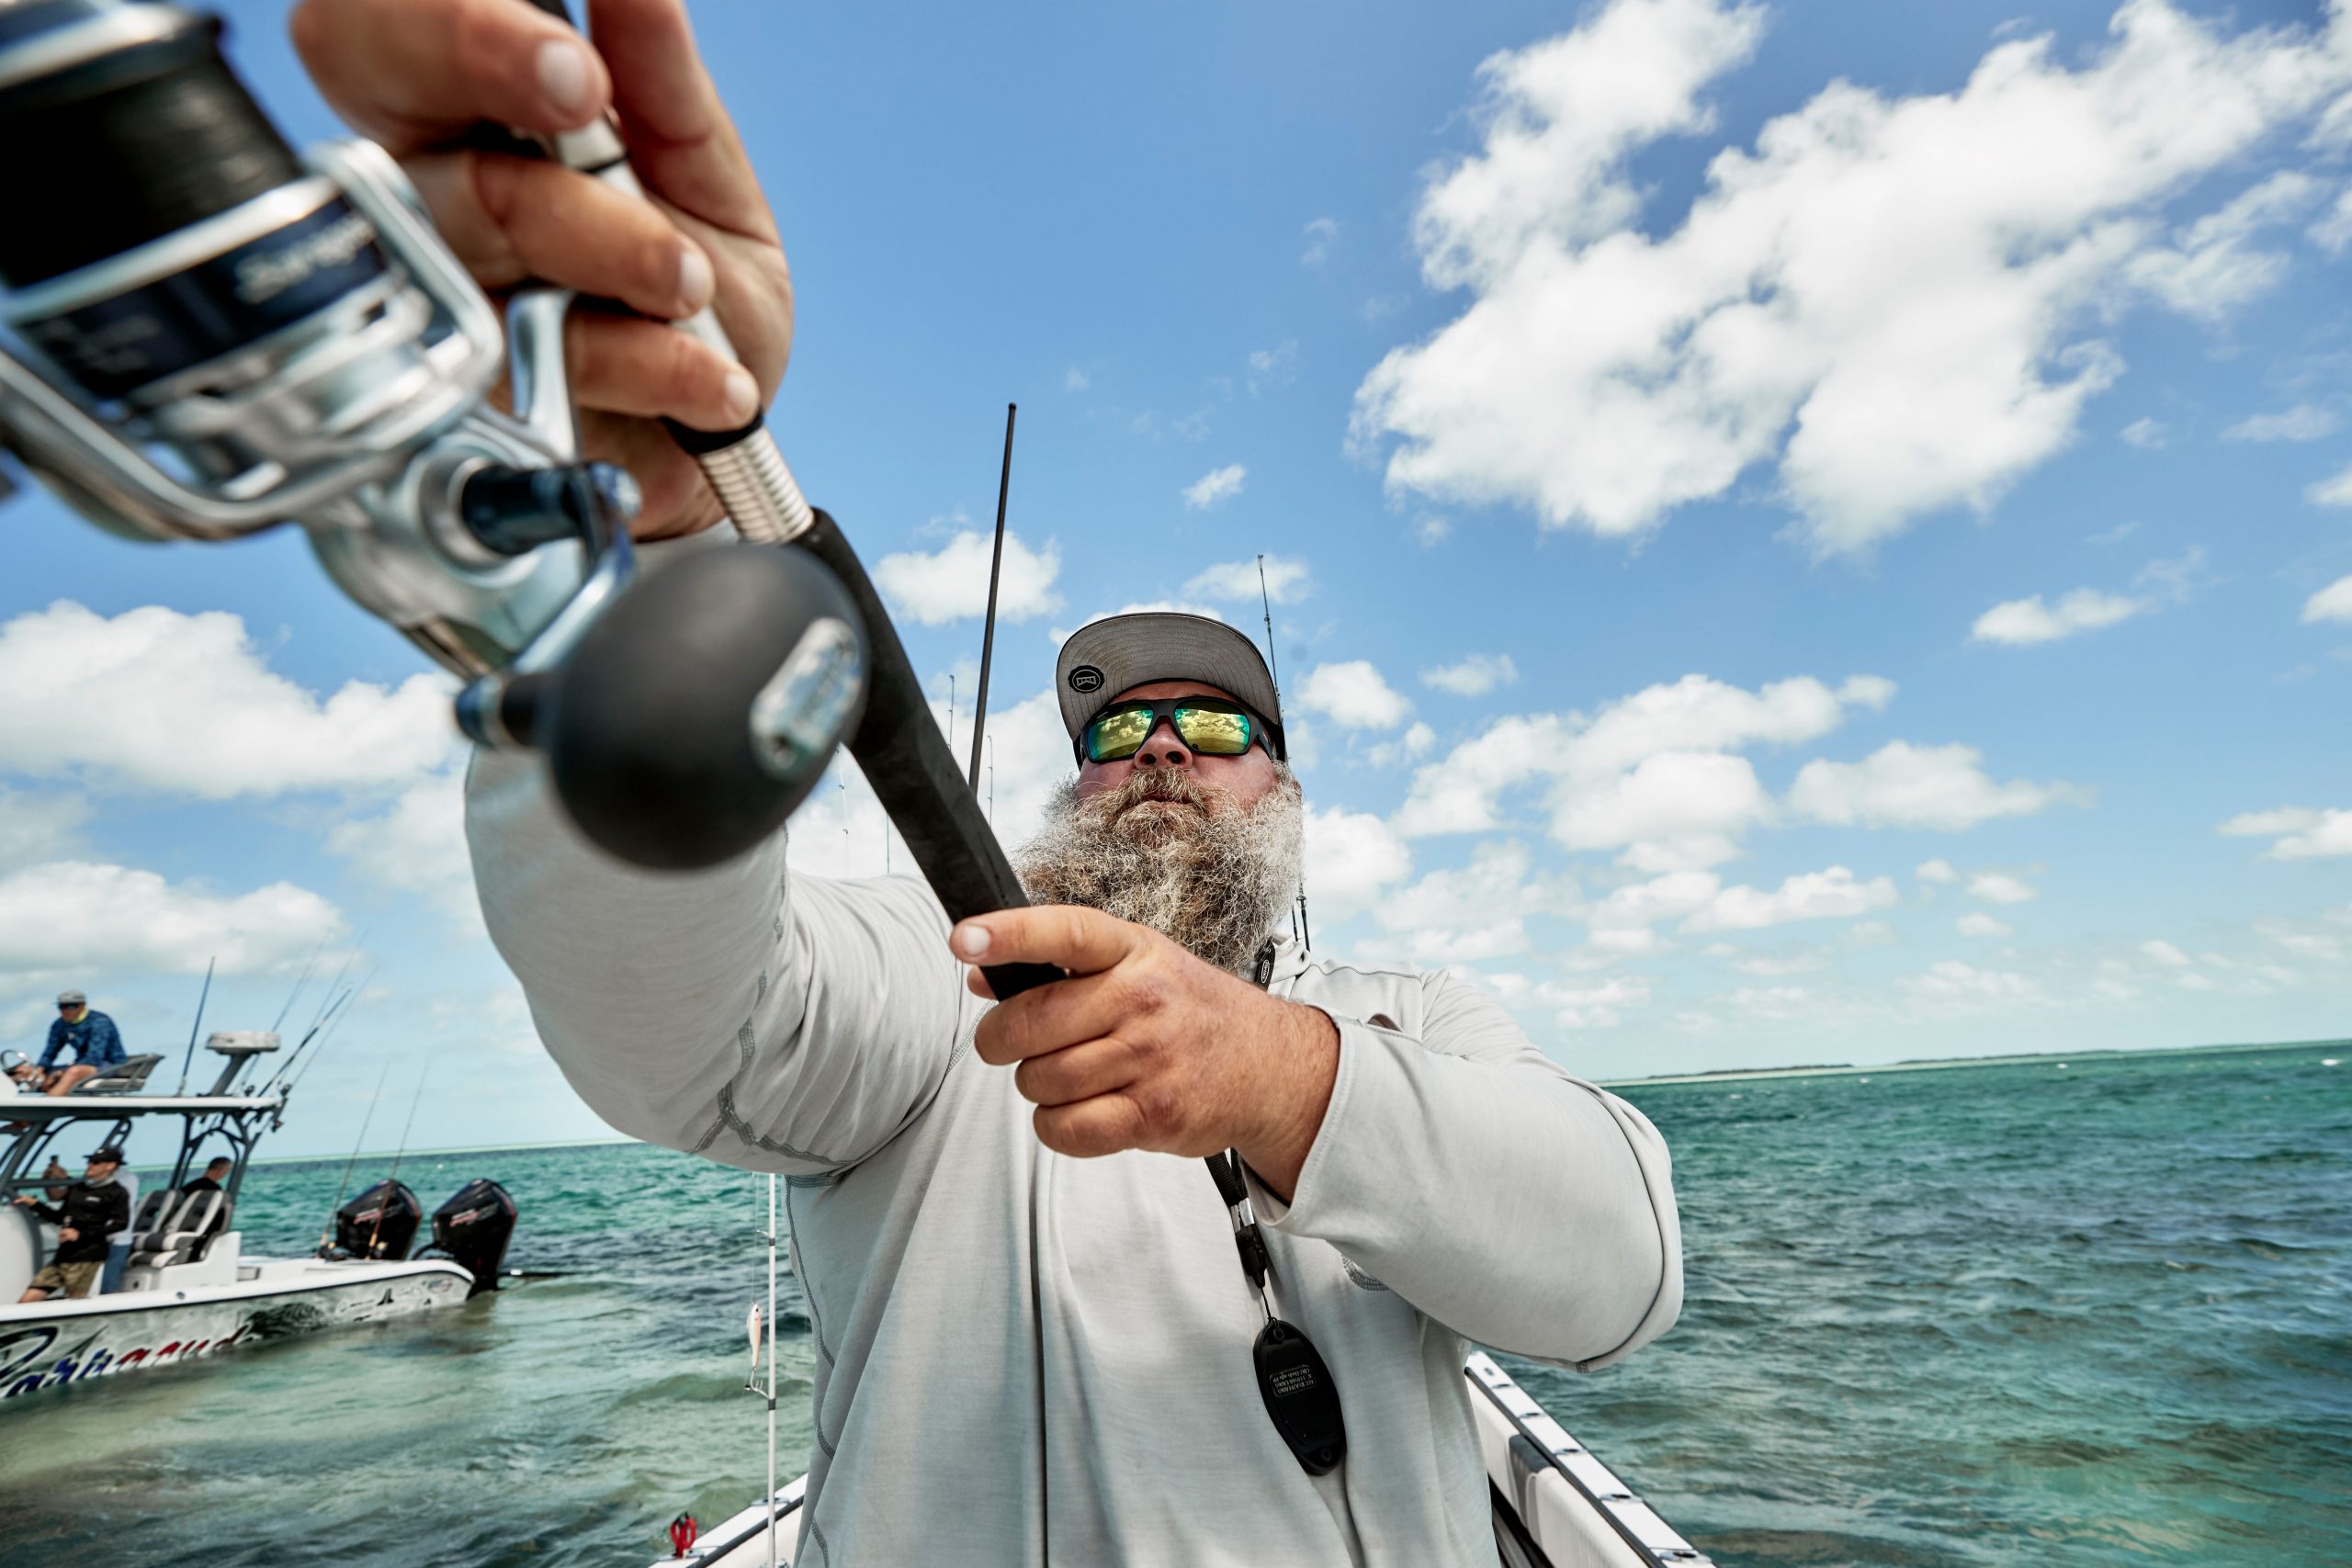 Top 7 Best Fishing Sunglasses [Review in 2023] to Keep Your Vision